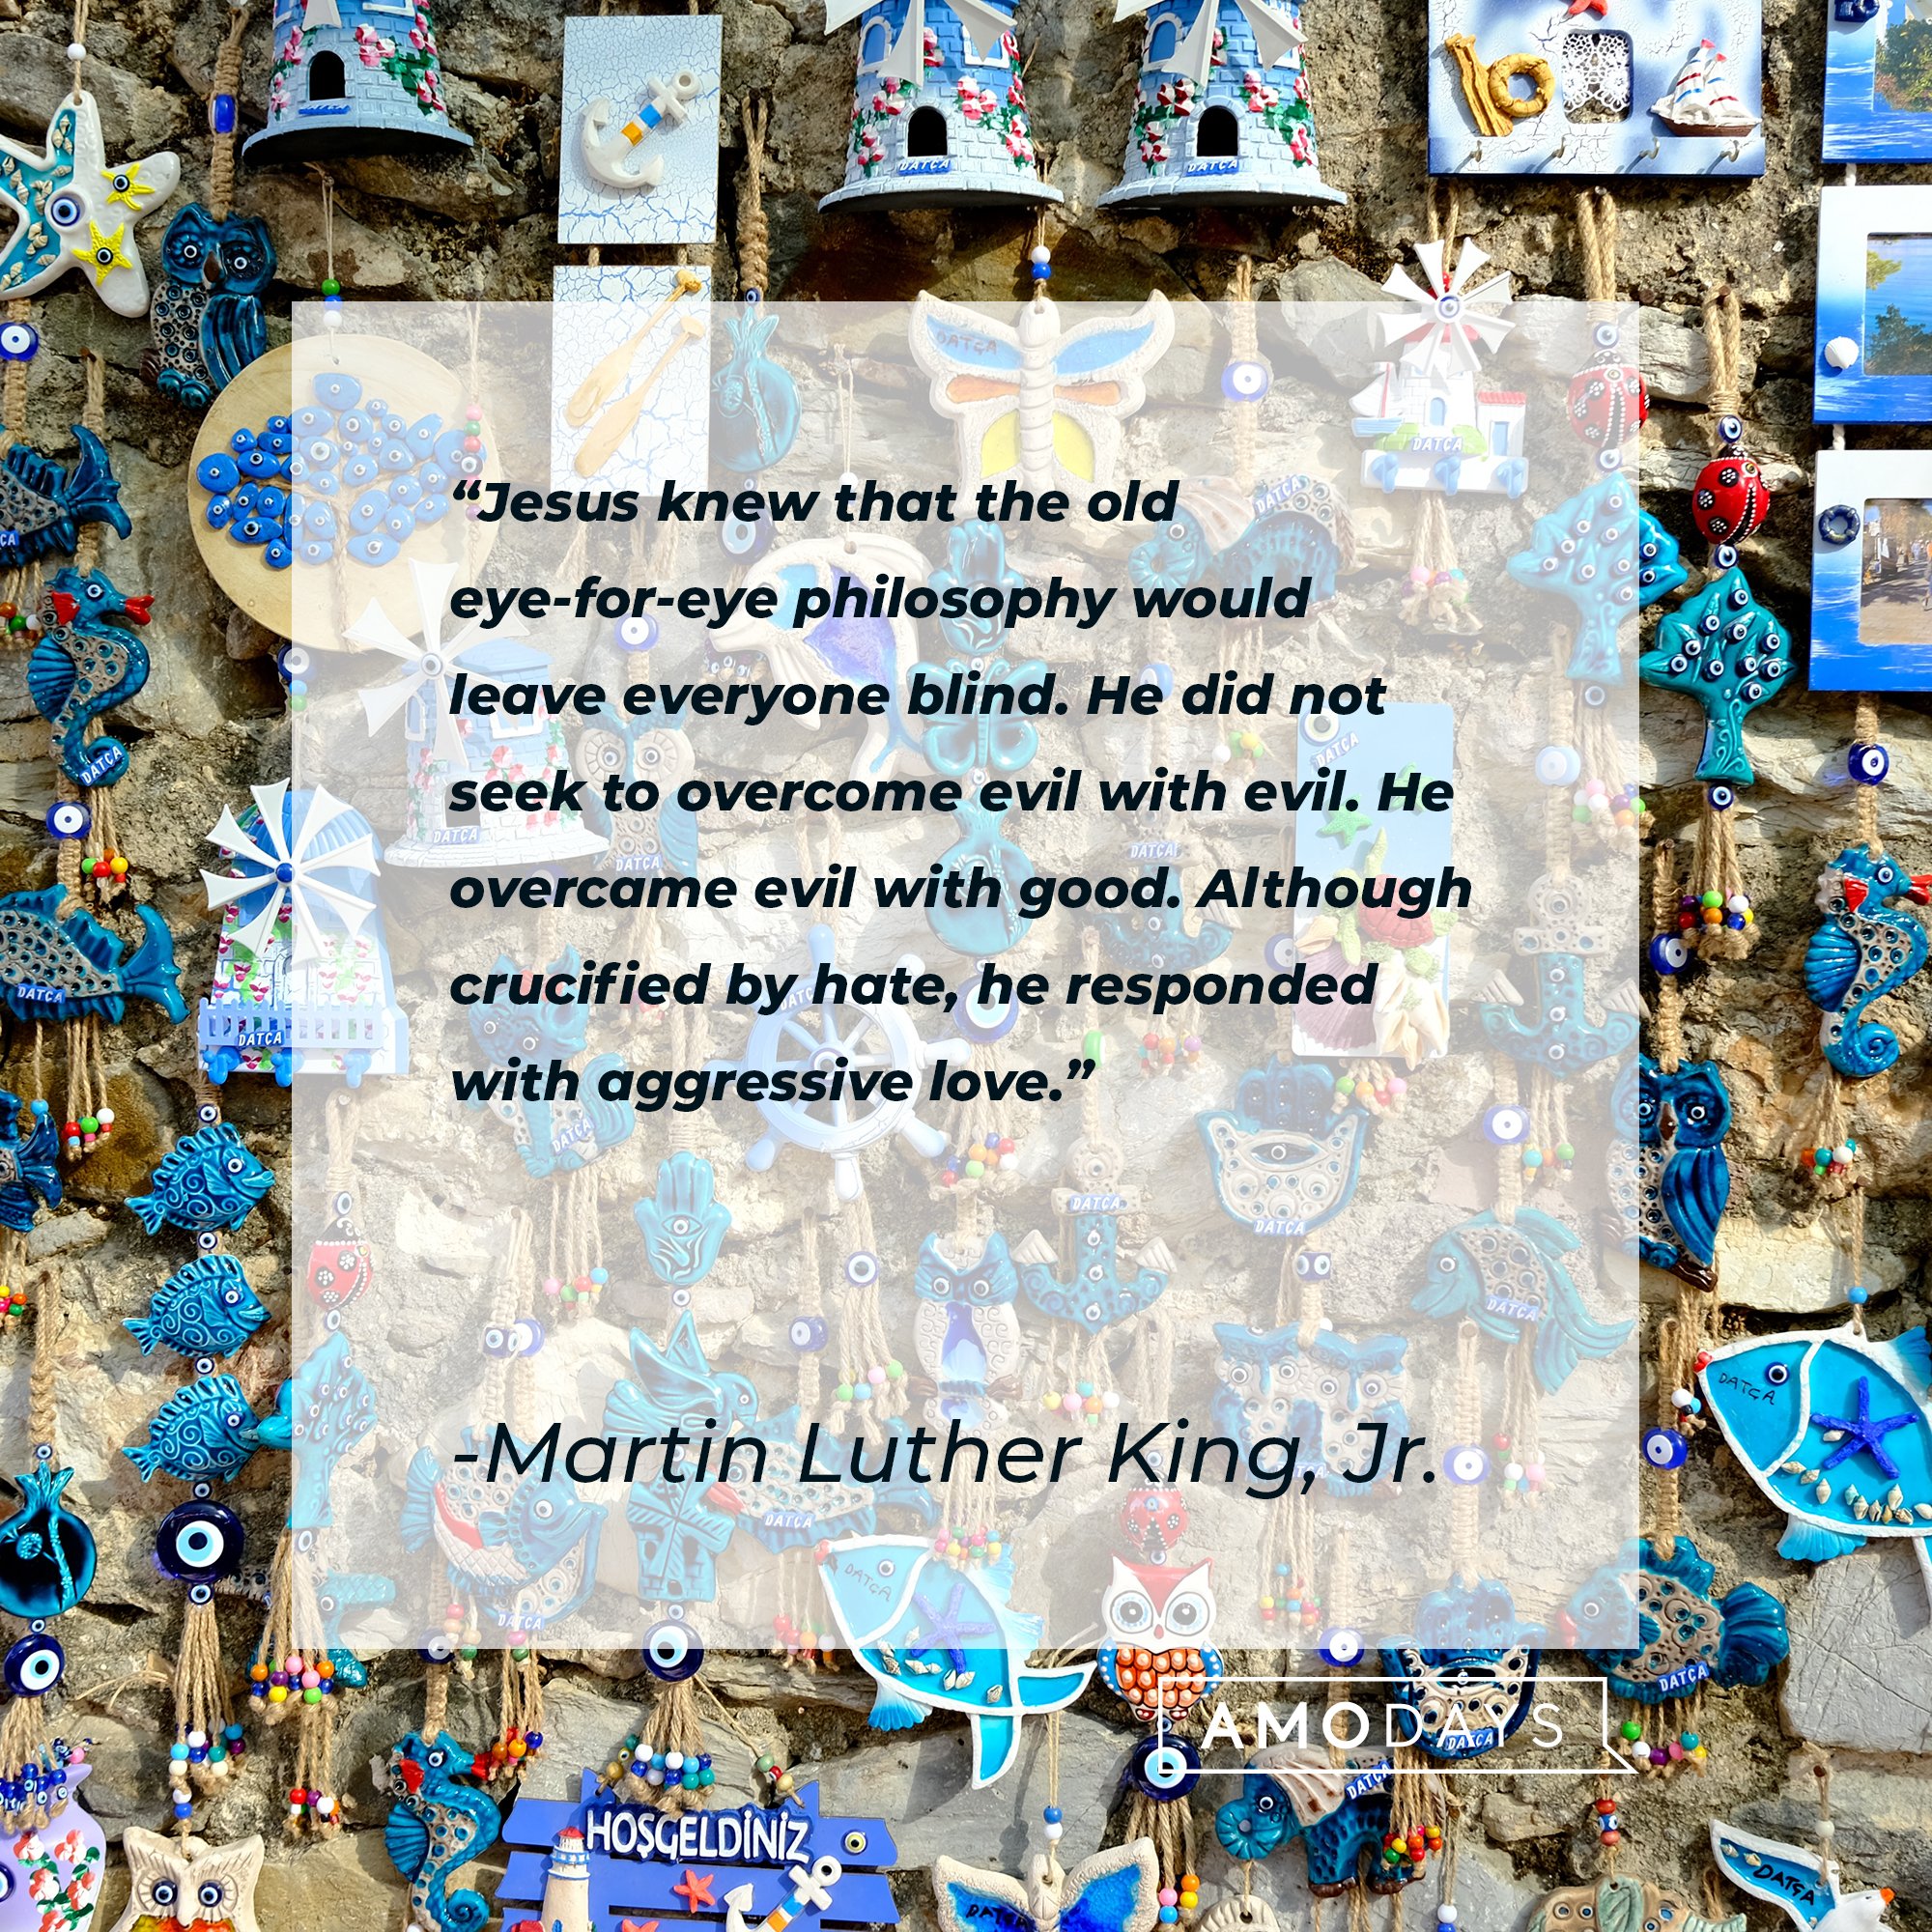 Martin Luther King, Jr.’s quote: "Jesus knew that the old eye-for-eye philosophy would leave everyone blind. He did not seek to overcome evil with evil. He overcame evil with good. Although crucified by hate, he responded with aggressive love." | Image: AmoDays